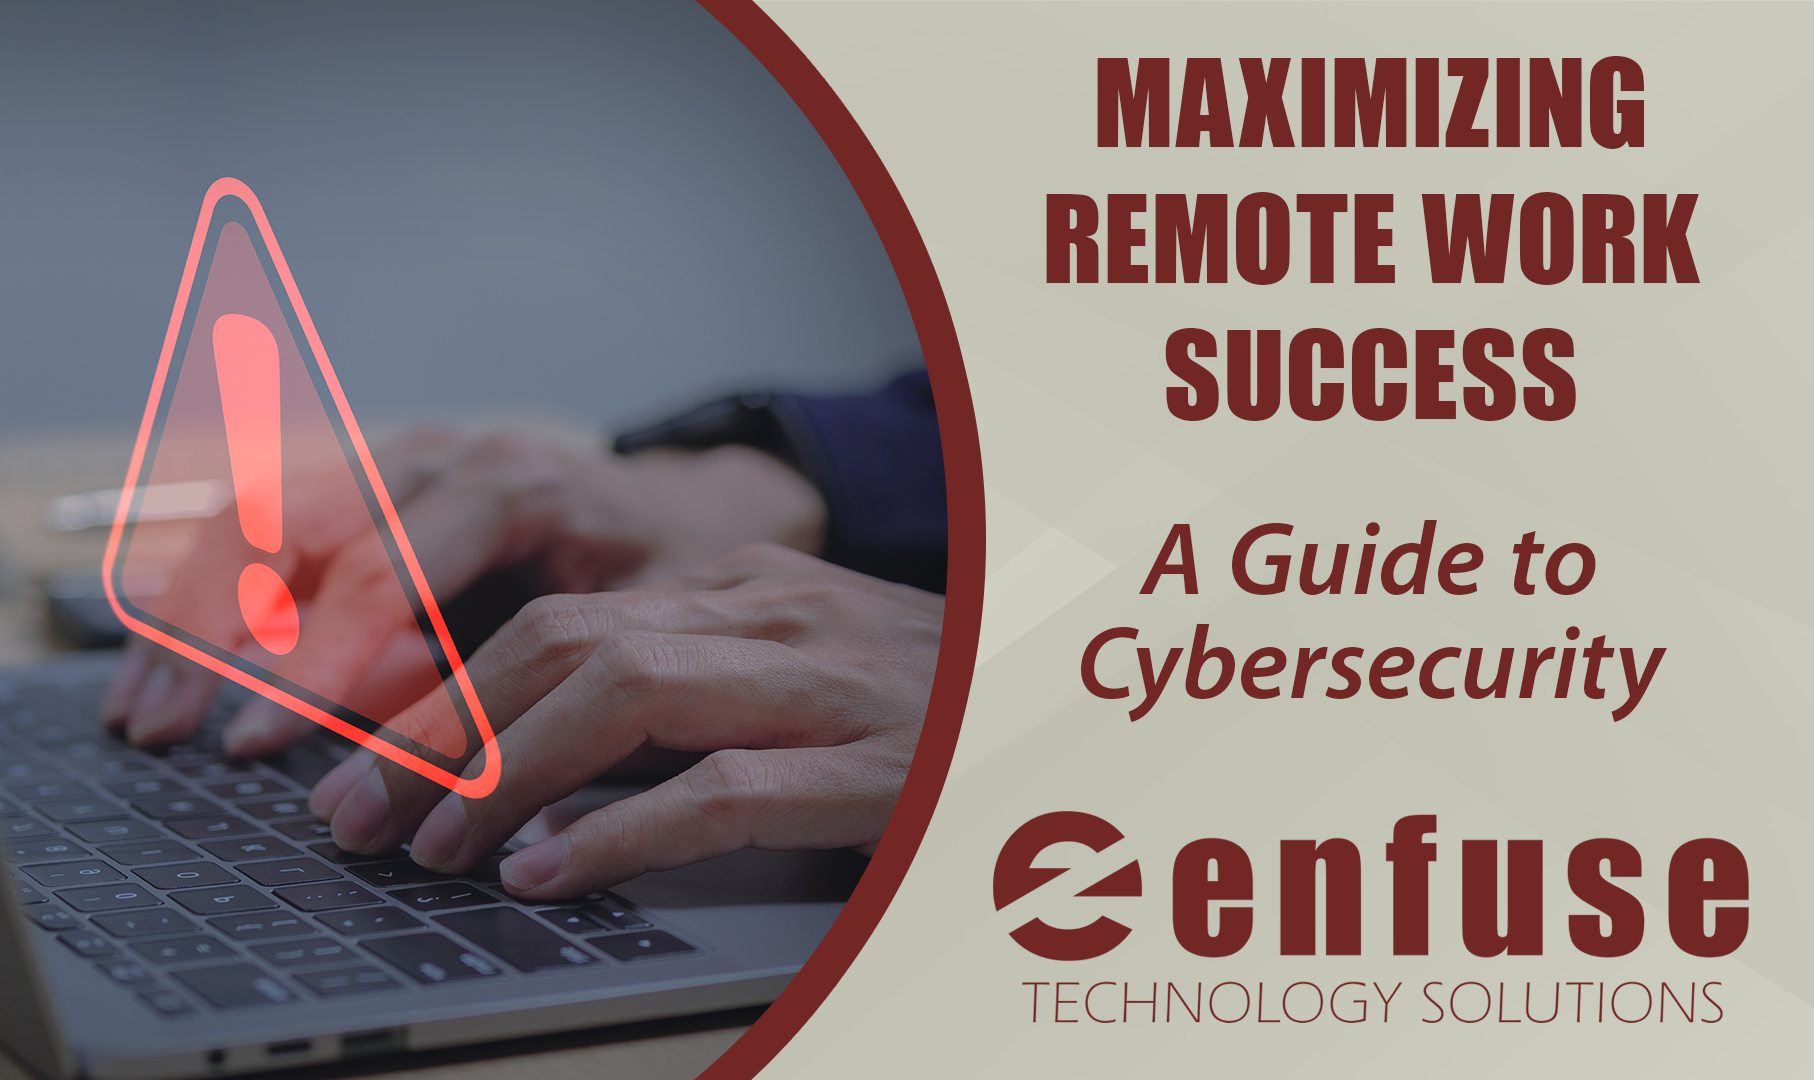 Maximizing Remote Work Success: A Guide to Cybersecurity